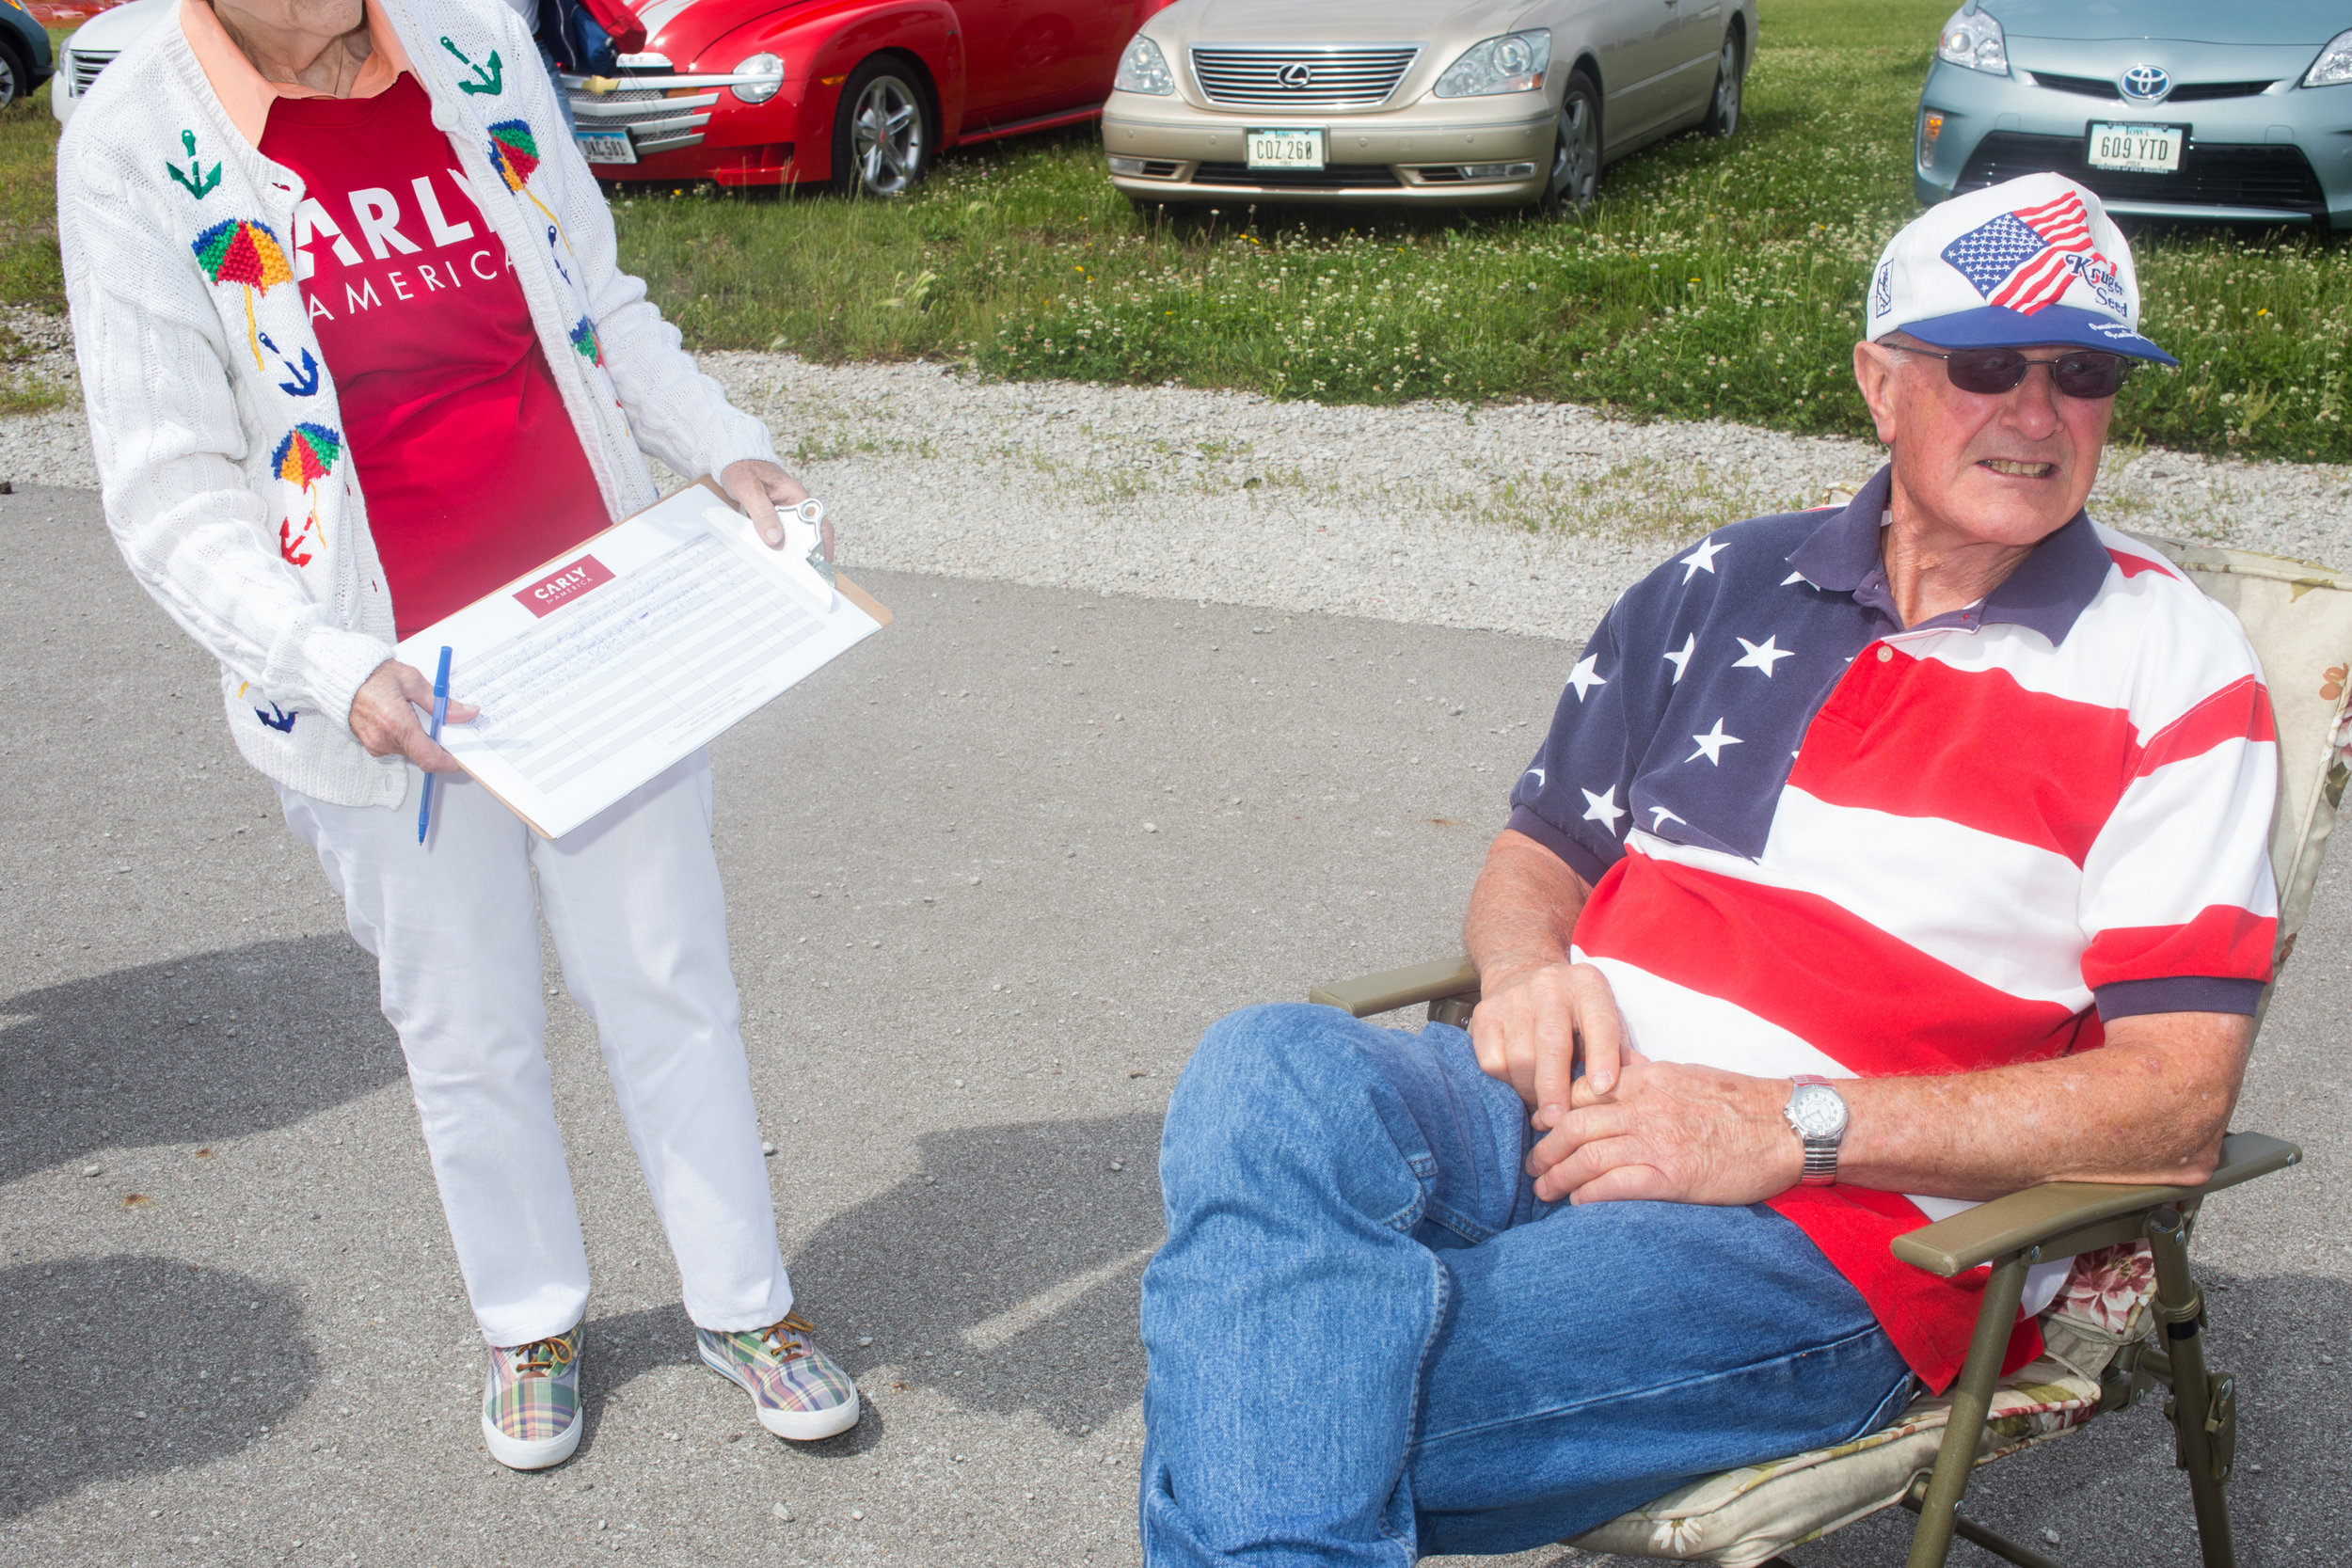  A volunteer for Carly Fiorina’s campaign gauges interest at Senator Joni Ernst's First Annual Roast &amp; Ride on June 6, 2015 in Boone, Iowa.  